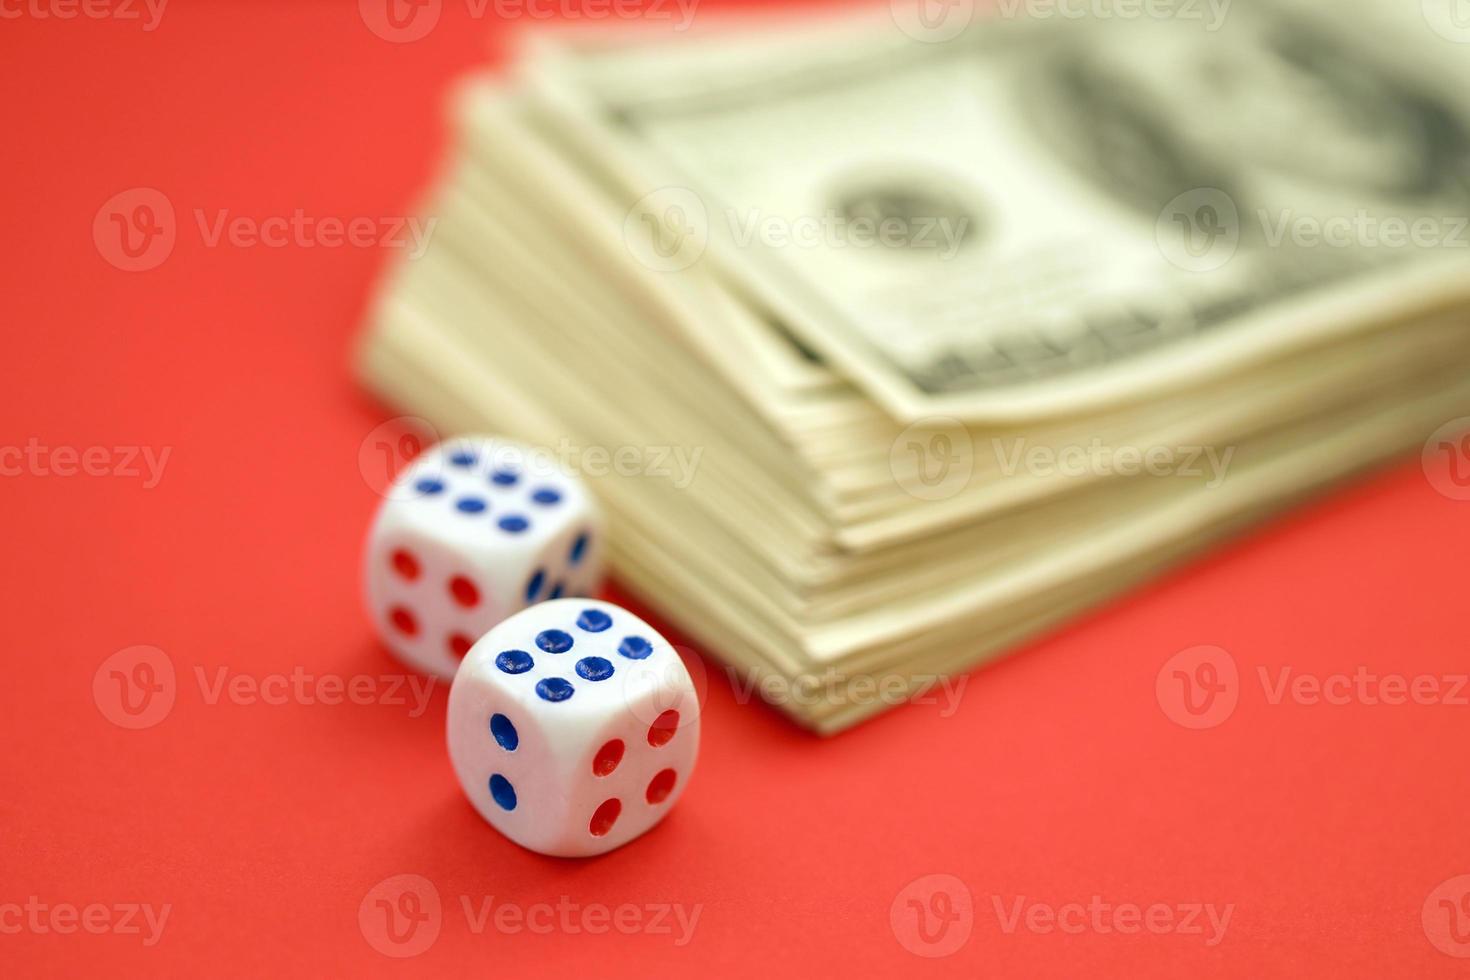 Money, finance and gambling concept. Close up on an American hundred US dollar banknotes and two white dice on top showing the numbers six photo